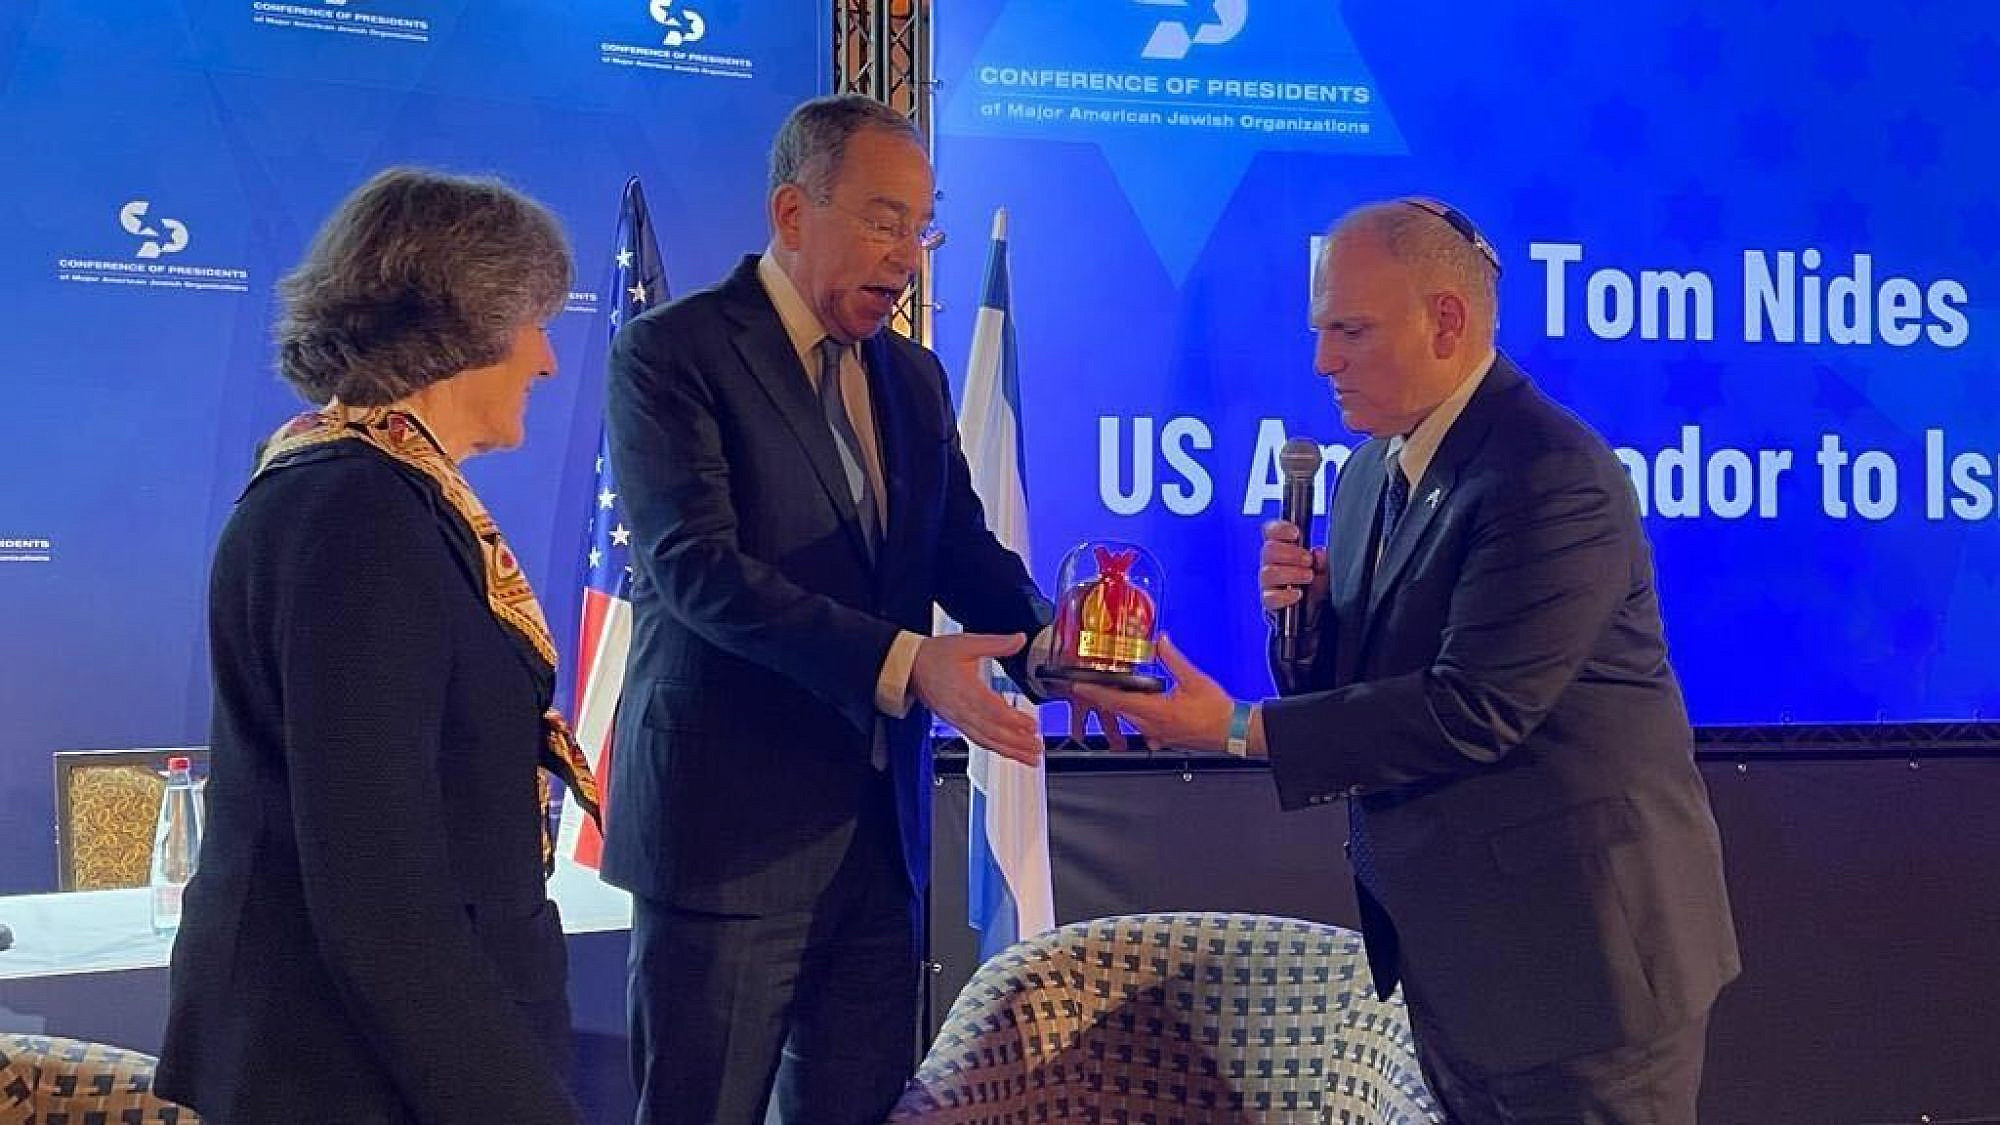 William Daroff, CEO of Conference Presidents of Major American Jewish Organizations, presents U.S. Ambassador to Israel Thomas Nides with a gift while Conference of Presidents chair Dianne Lob looks on. Photo by Alex Traiman.